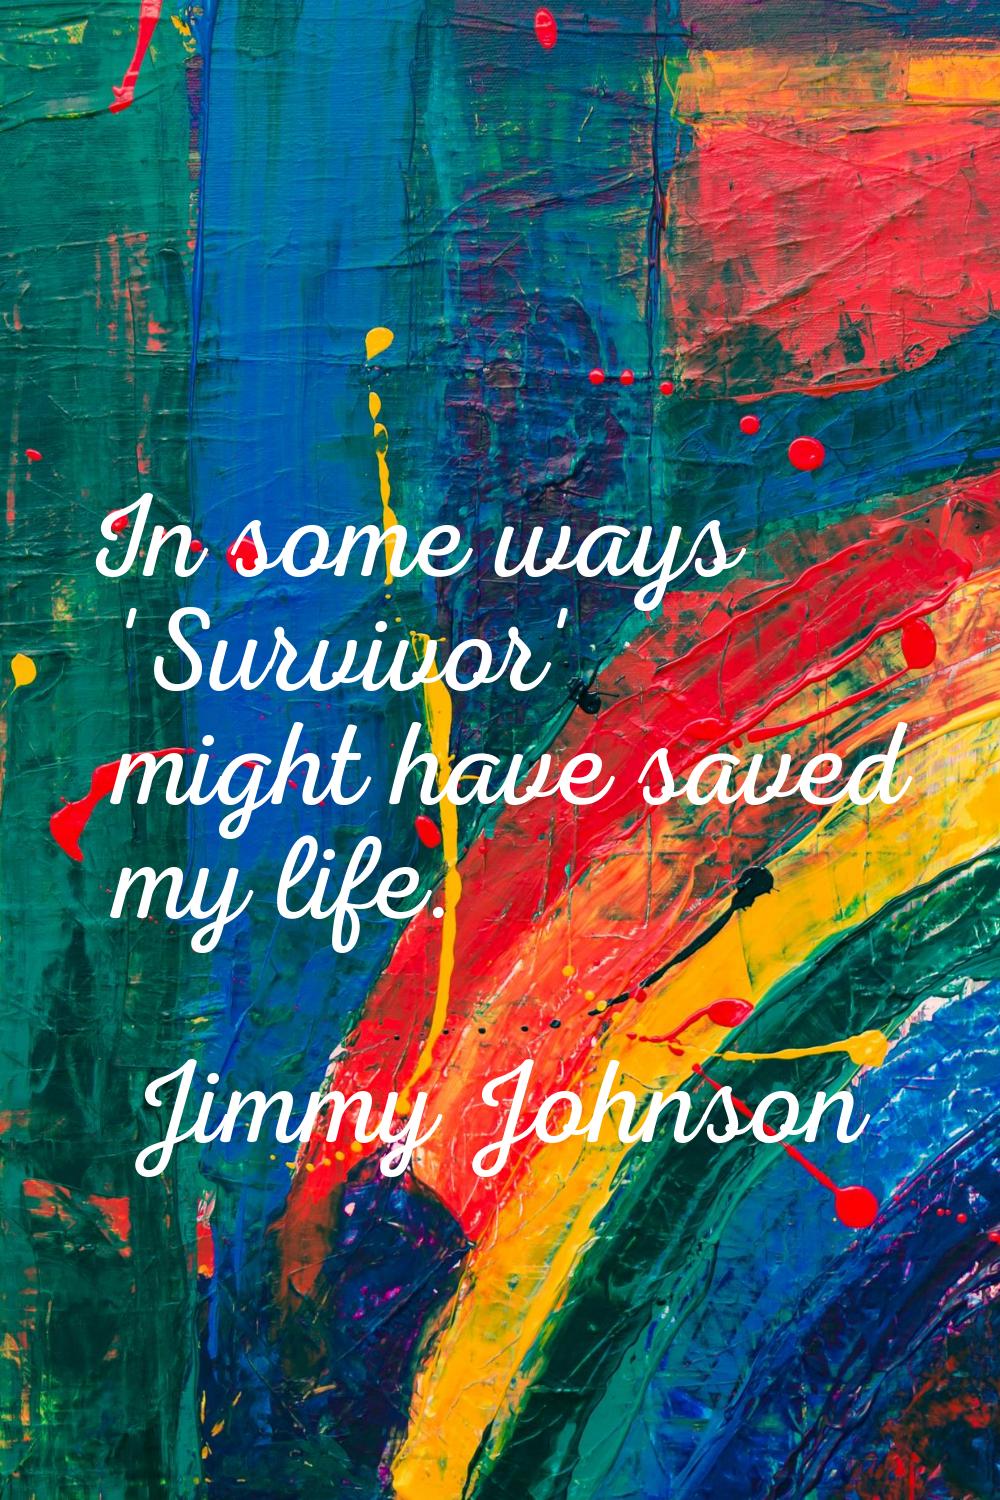 In some ways 'Survivor' might have saved my life.